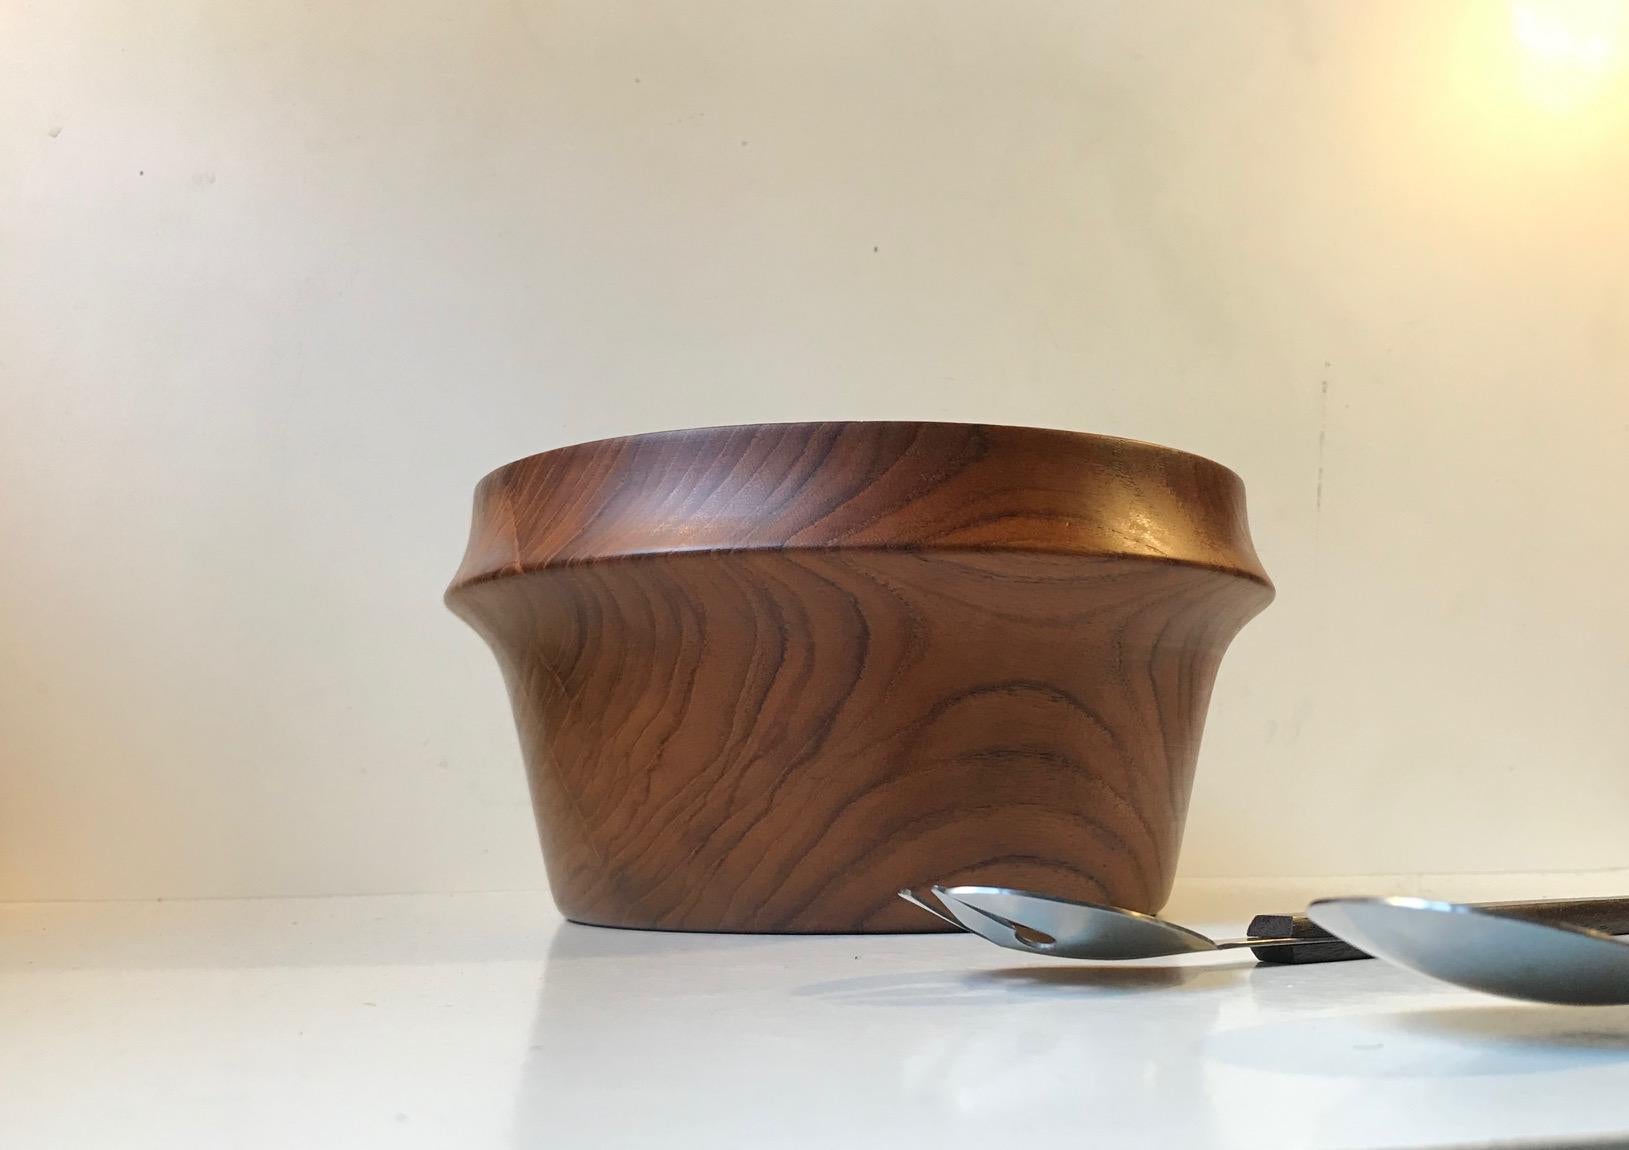 Large hand-turned wooden solid teak bowl from Wiggers, Denmark. It was designed and manufactured in the early 1960s. Wiggers collaborated with Illums Bolighus in Copenhagen during this period. The bowl comes with a salad serving set in rosewood and